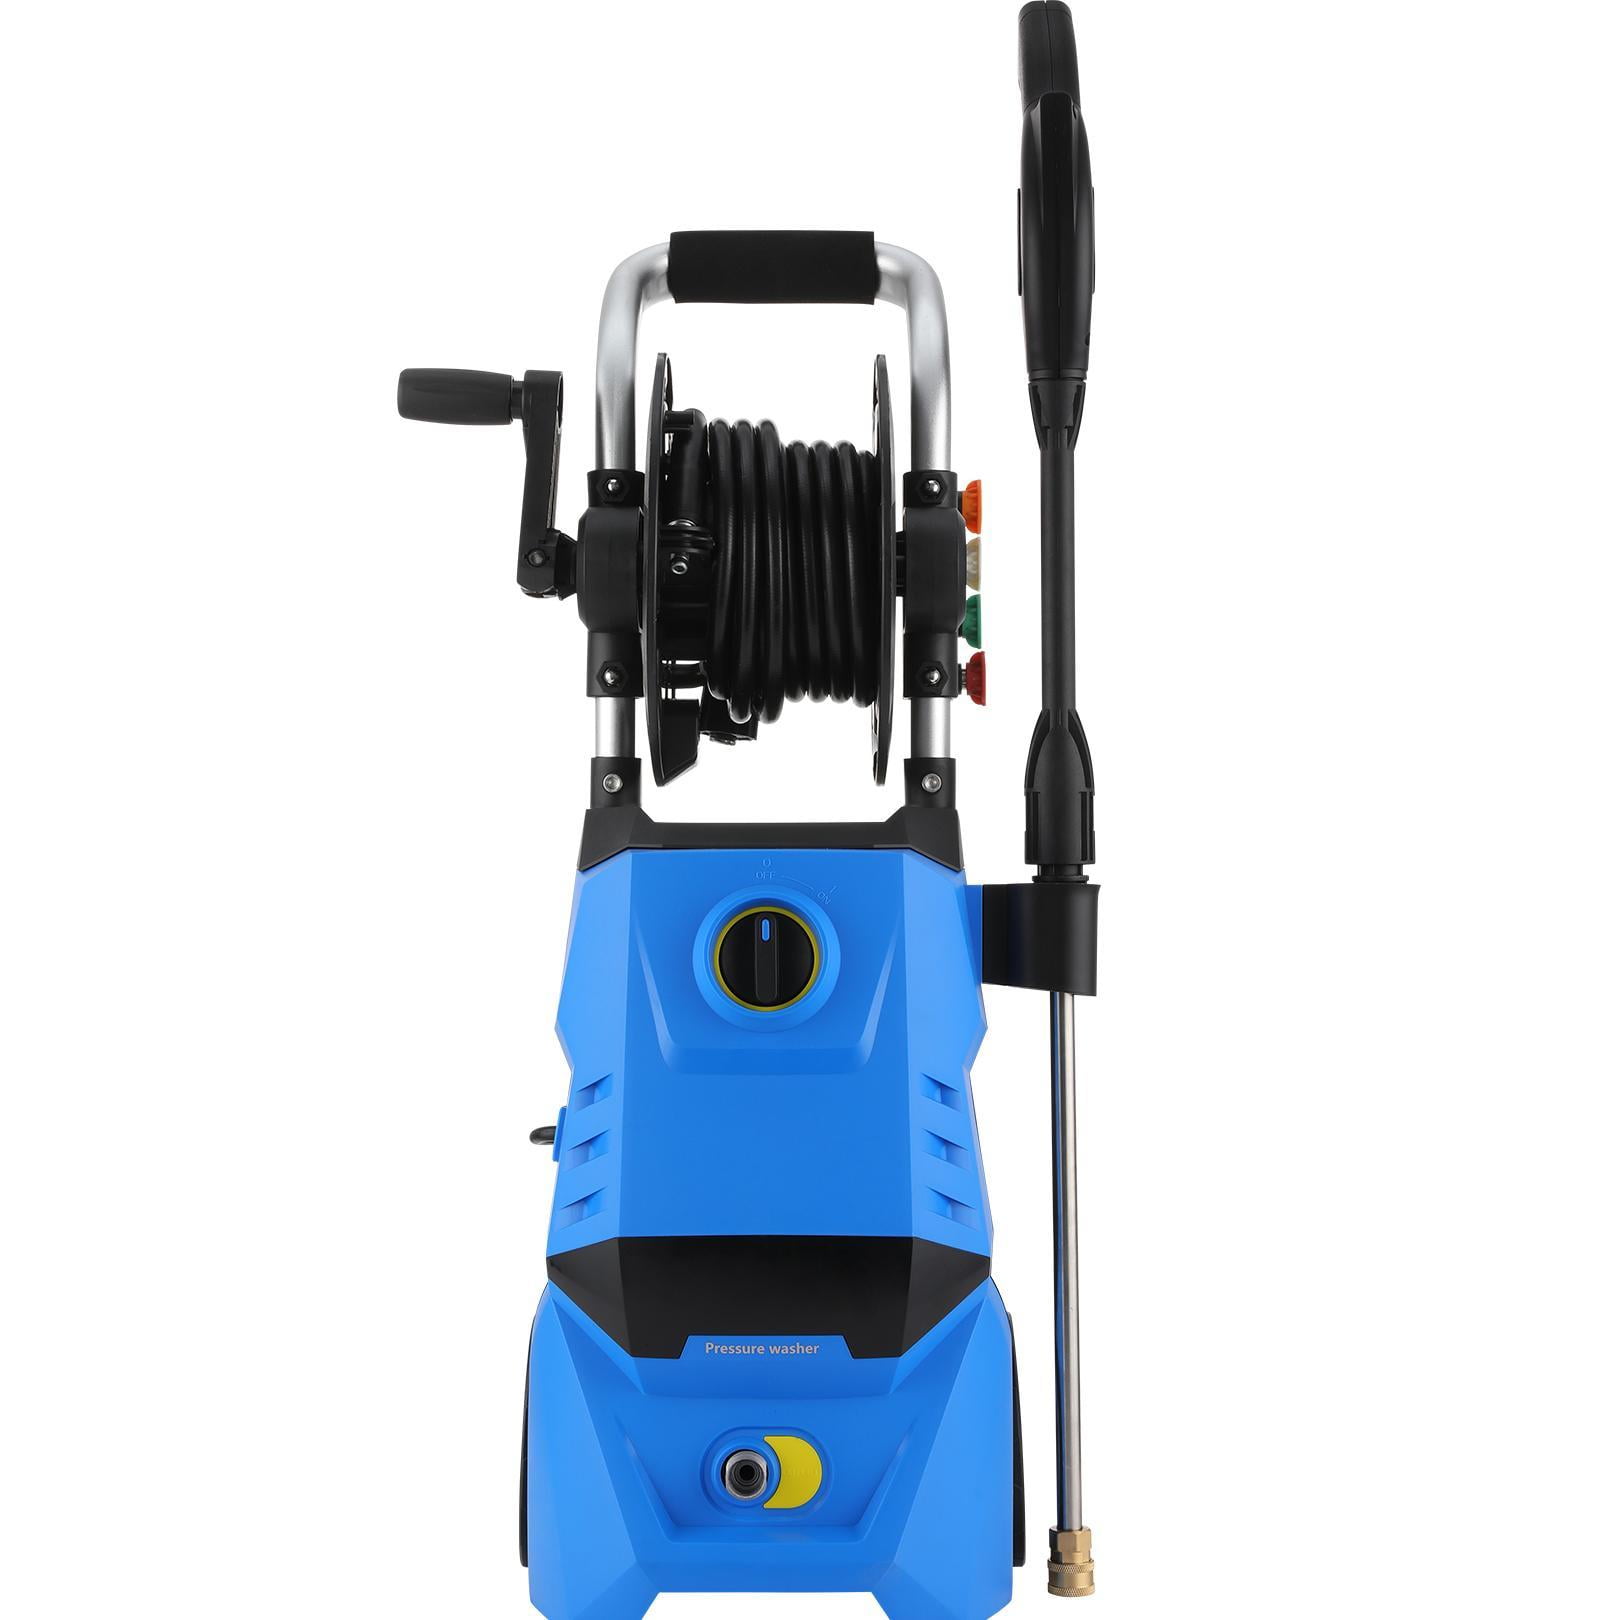  Enventor Electric Pressure Washer, 2300 PSI, Portable High  Pressure Cleaner Machine, with 4 Nozzles, Foam Cannon for Cars, Homes,  Driveways, Patios, Light Weight Pressure Washer, Power Washer : Patio, Lawn  & Garden